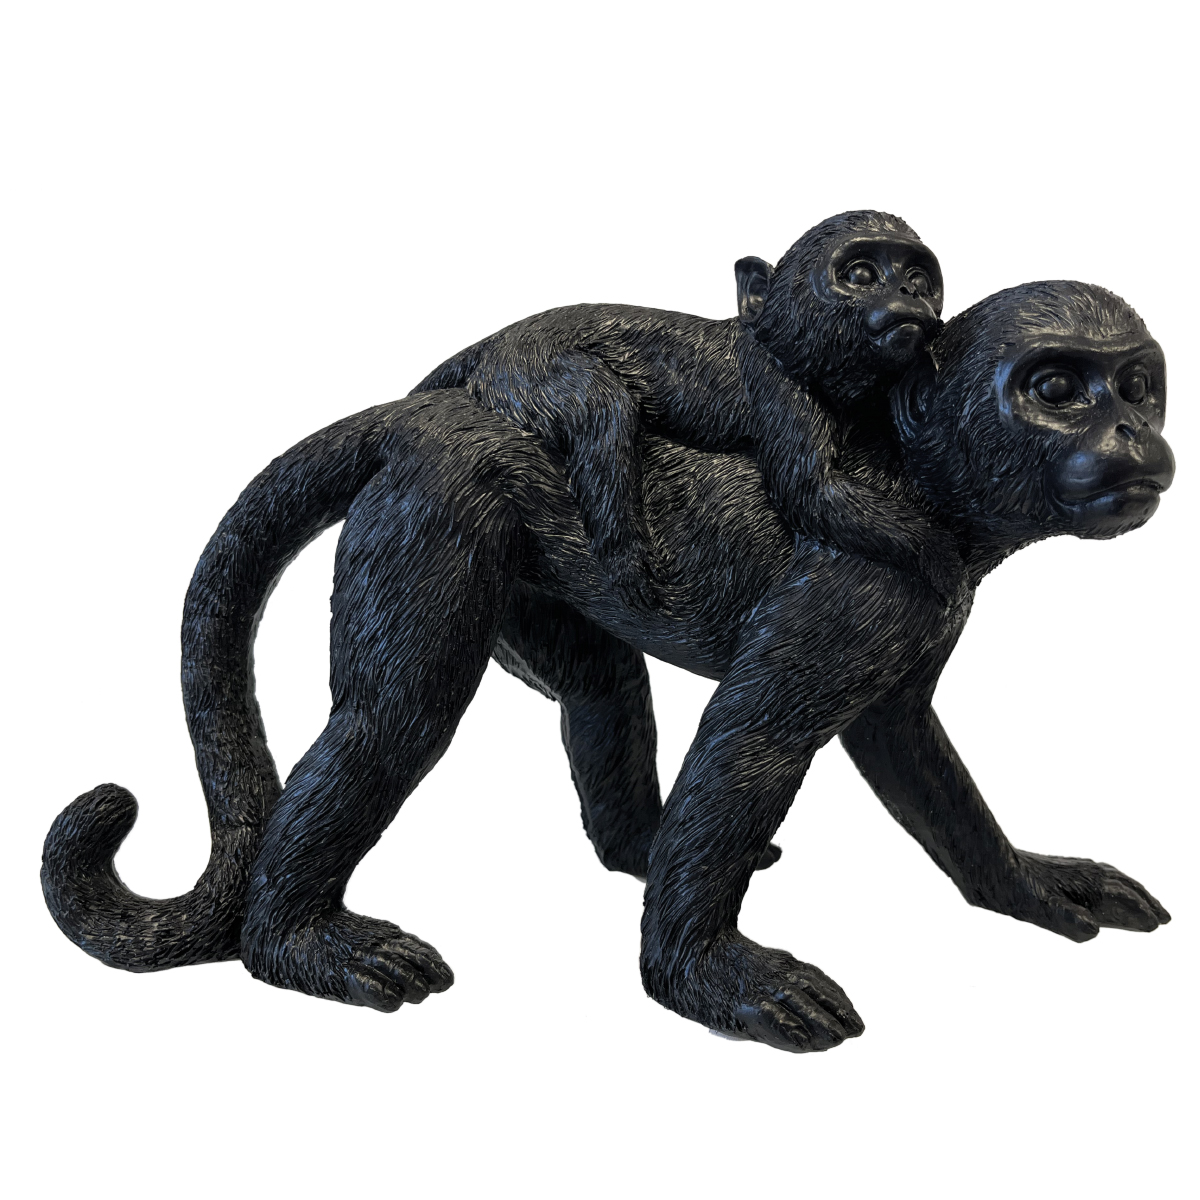 Decorative statuette Mother monkey and baby